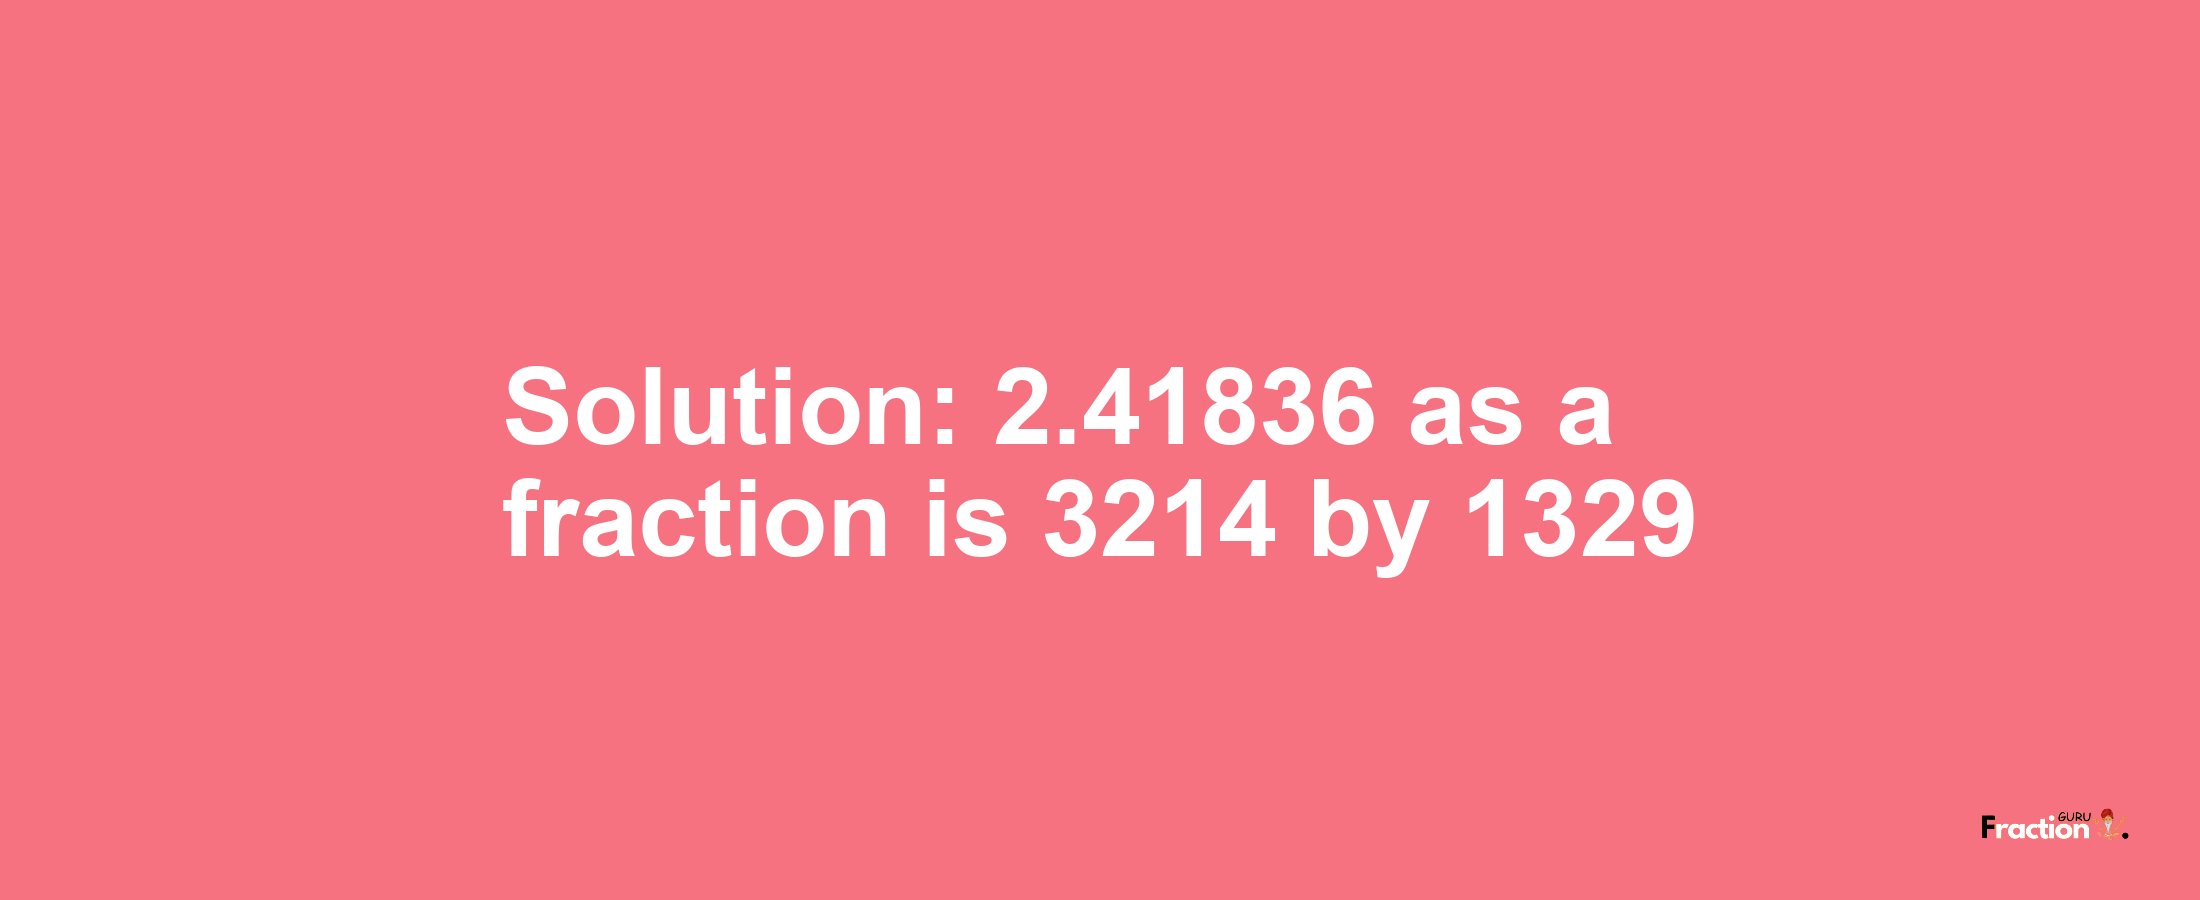 Solution:2.41836 as a fraction is 3214/1329